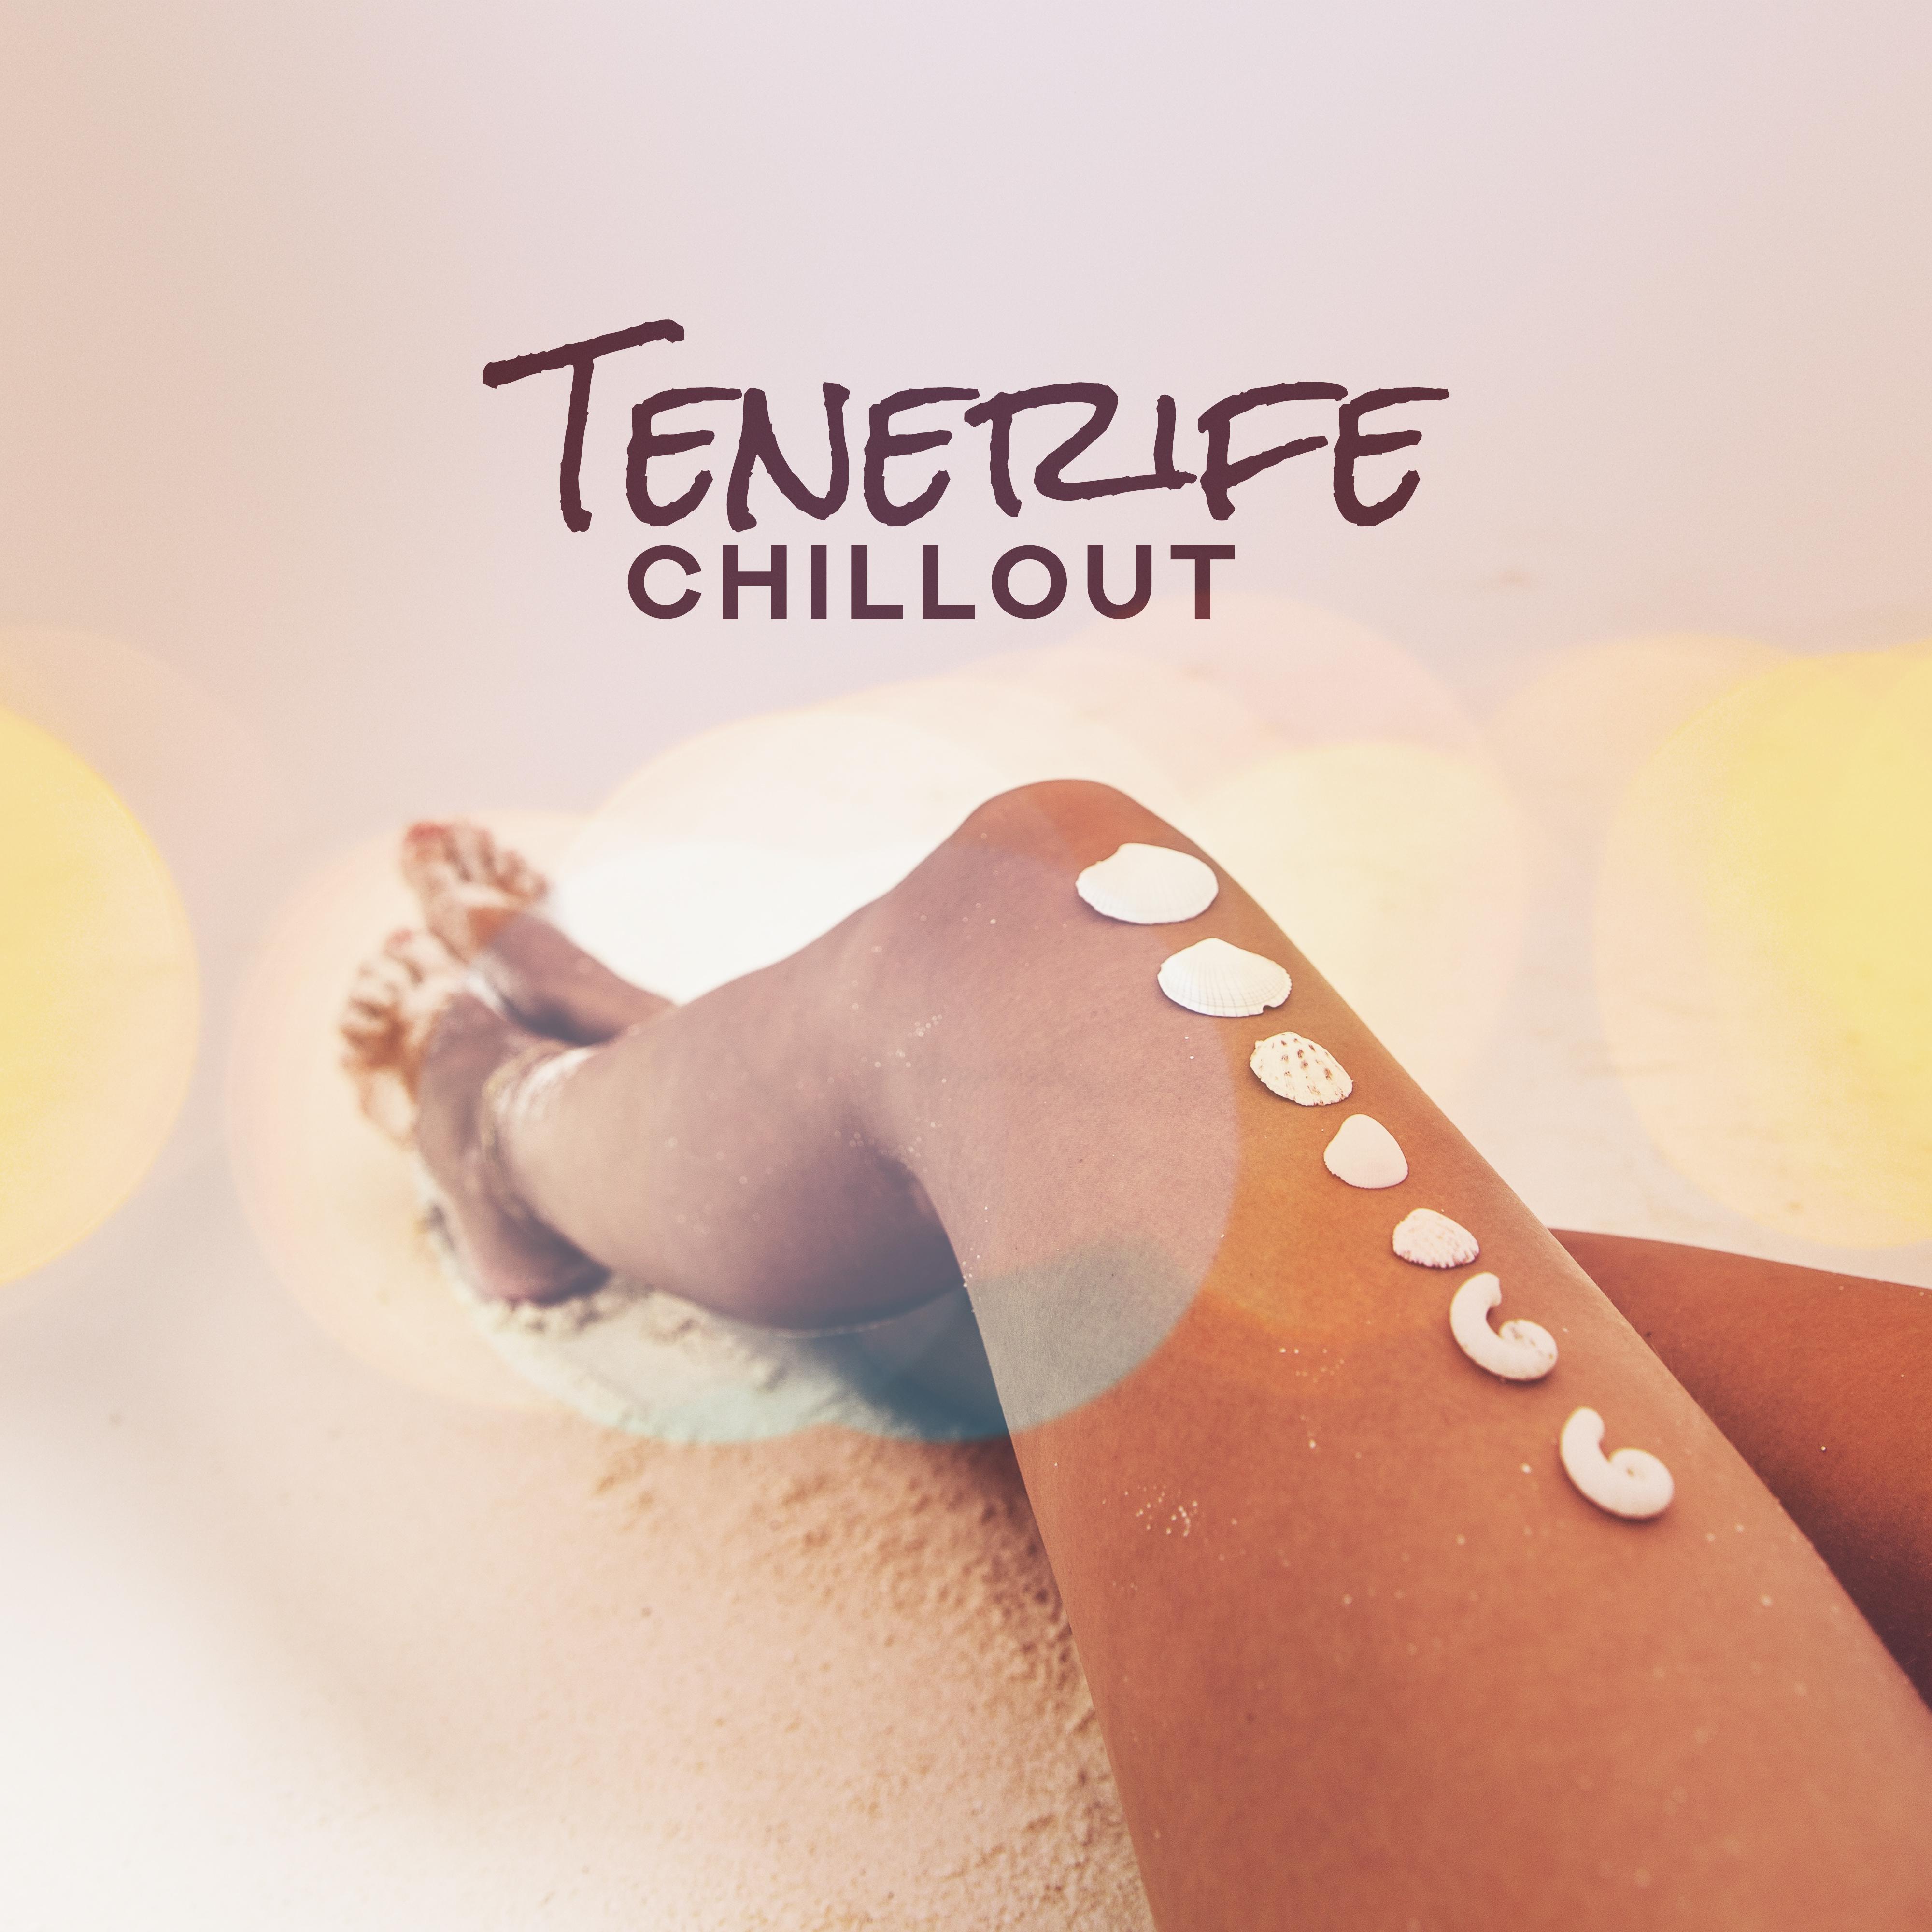 Tenerife Chill Out: Summer Music 2019, Lounge, Bar Chillout, **** Tropical Chill, Deep Relax, Beach Party, Chill Out 2019